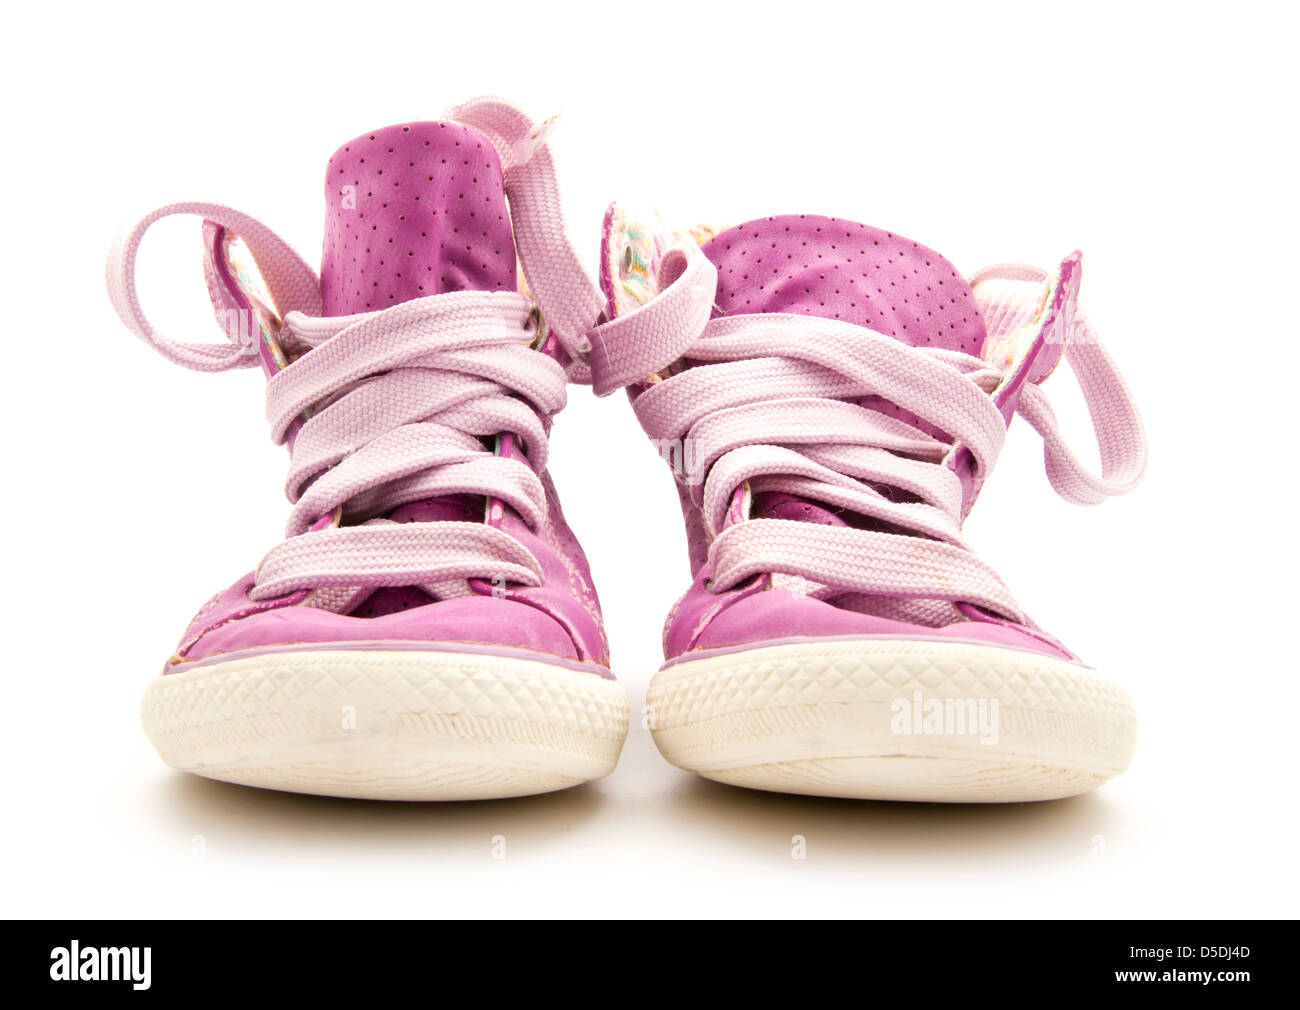 pair of purple sneakers isolated on white background Stock Photo - Alamy